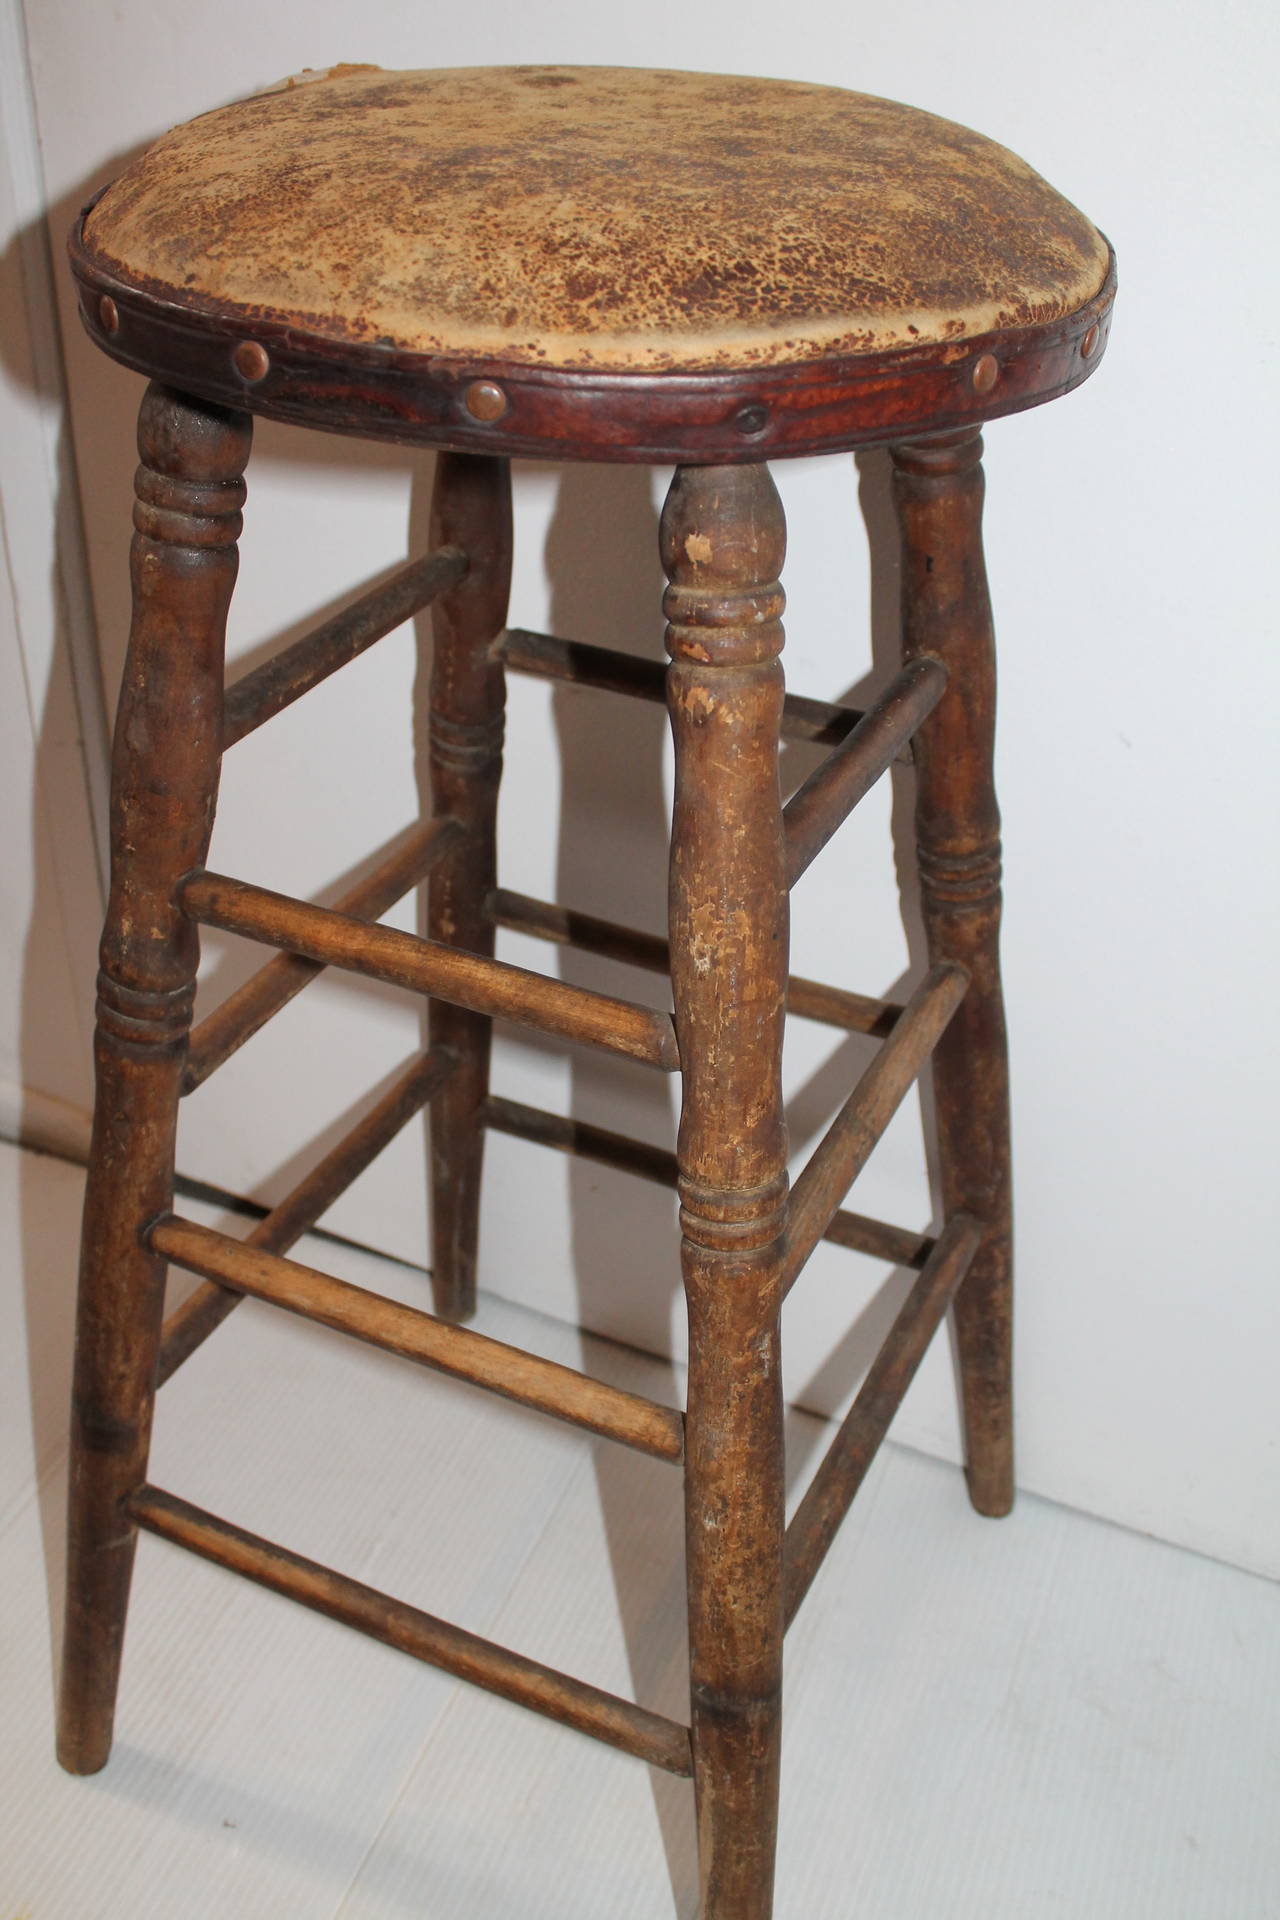 This is a old leather seat on this Industrial stool from a old shoe factory. The condition is good with a worn leather seat and pine base.